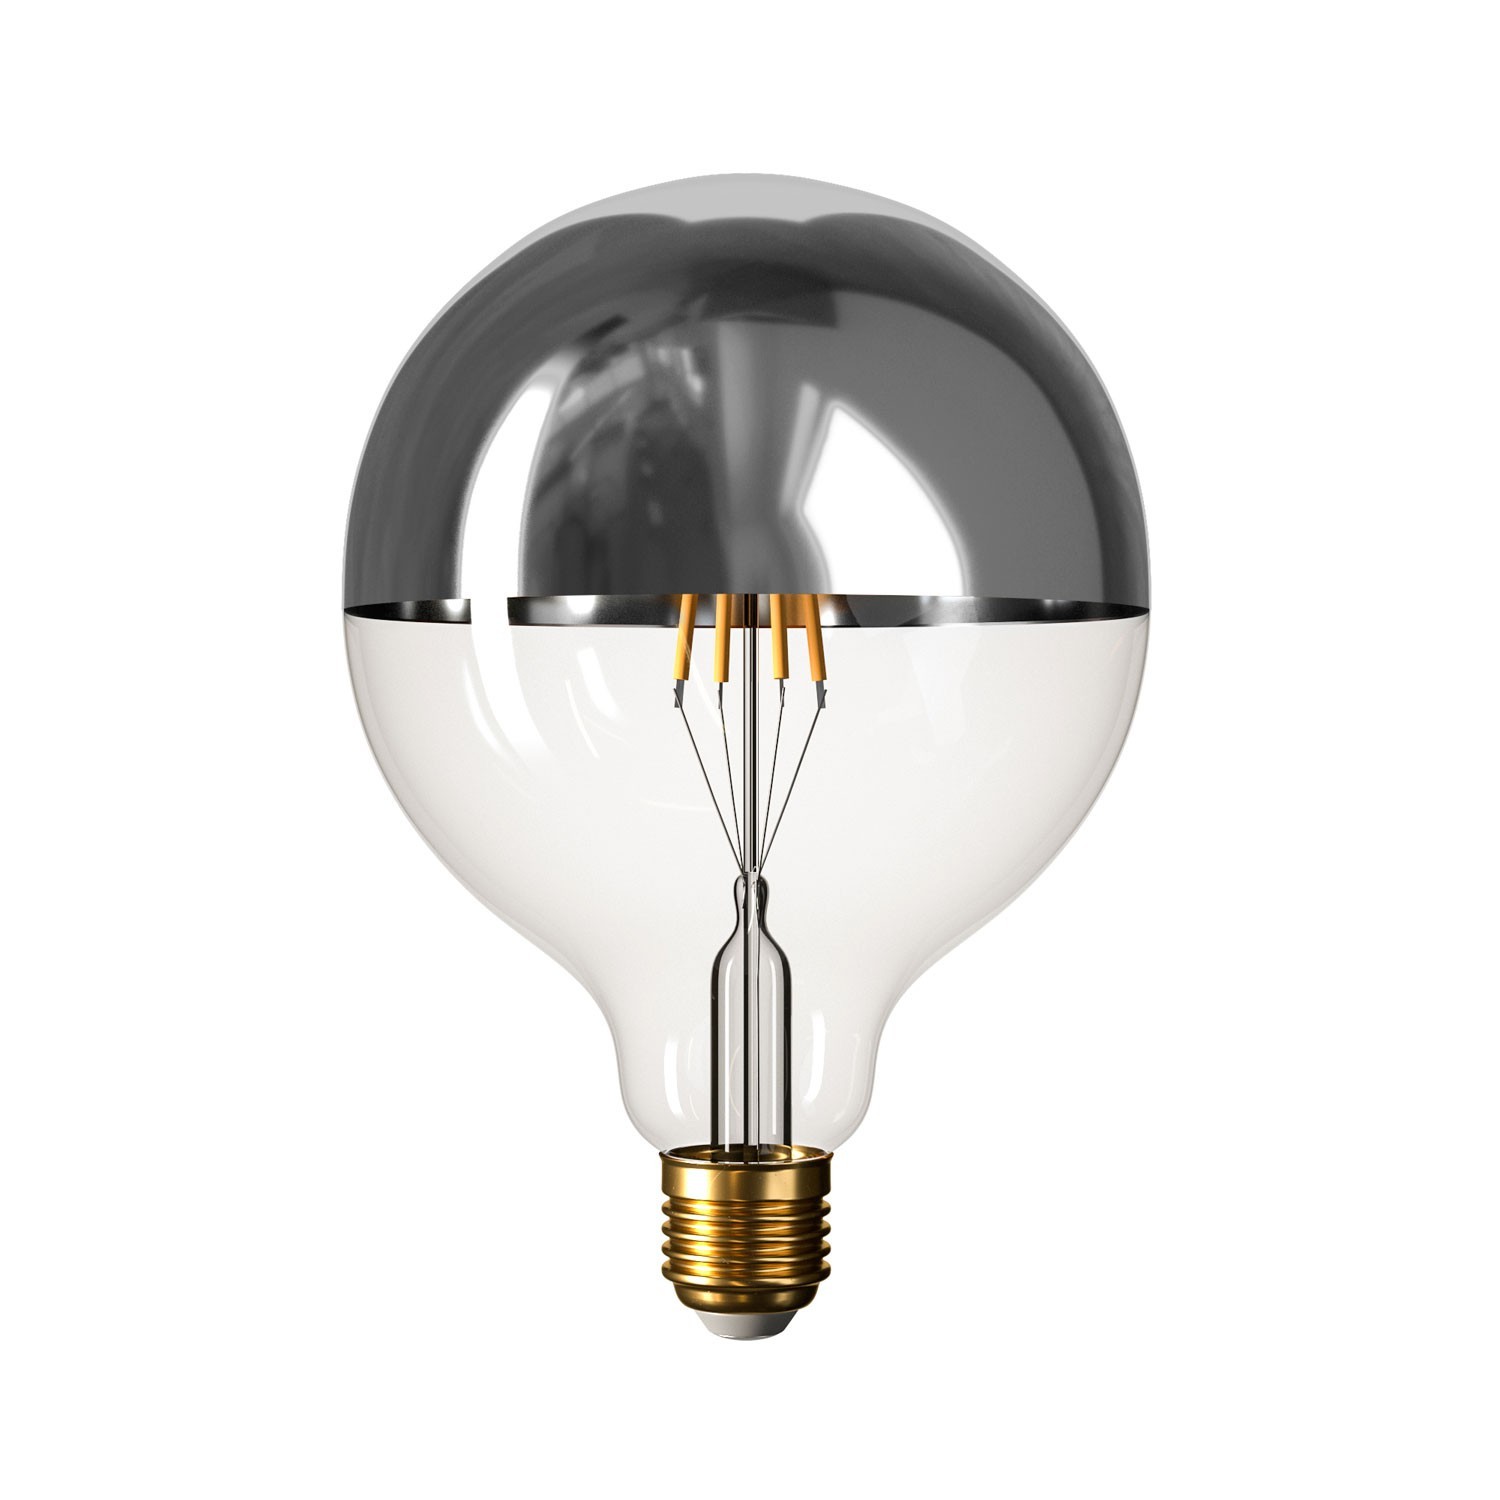 Applique with exposed light bulb and half silver sphere - IP44 Waterproof